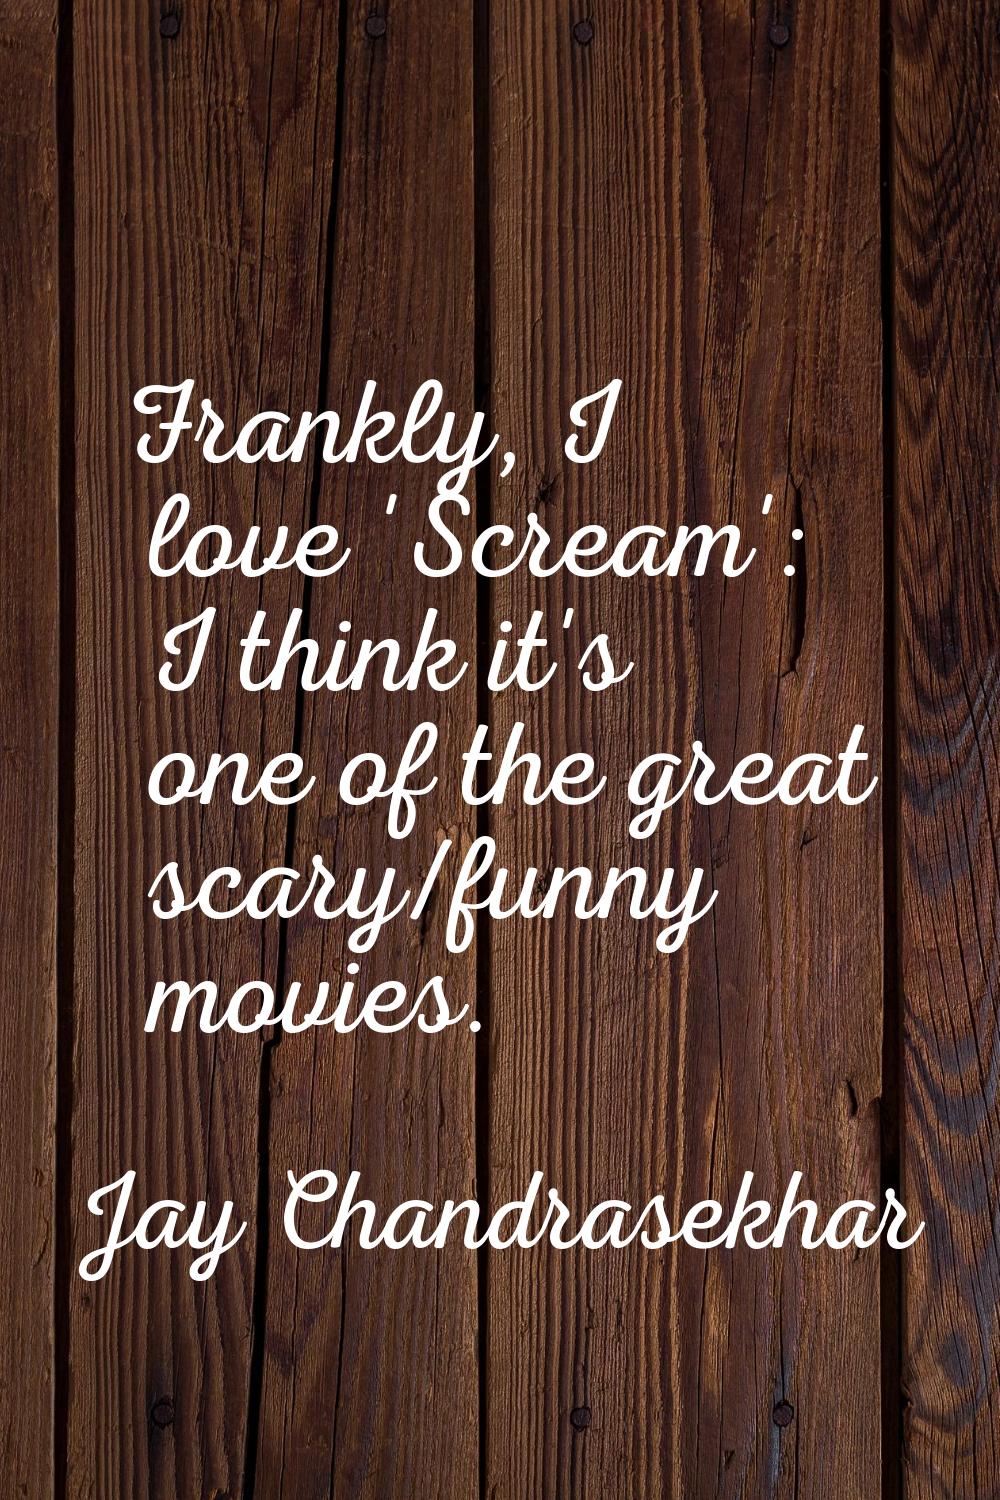 Frankly, I love 'Scream': I think it's one of the great scary/funny movies.